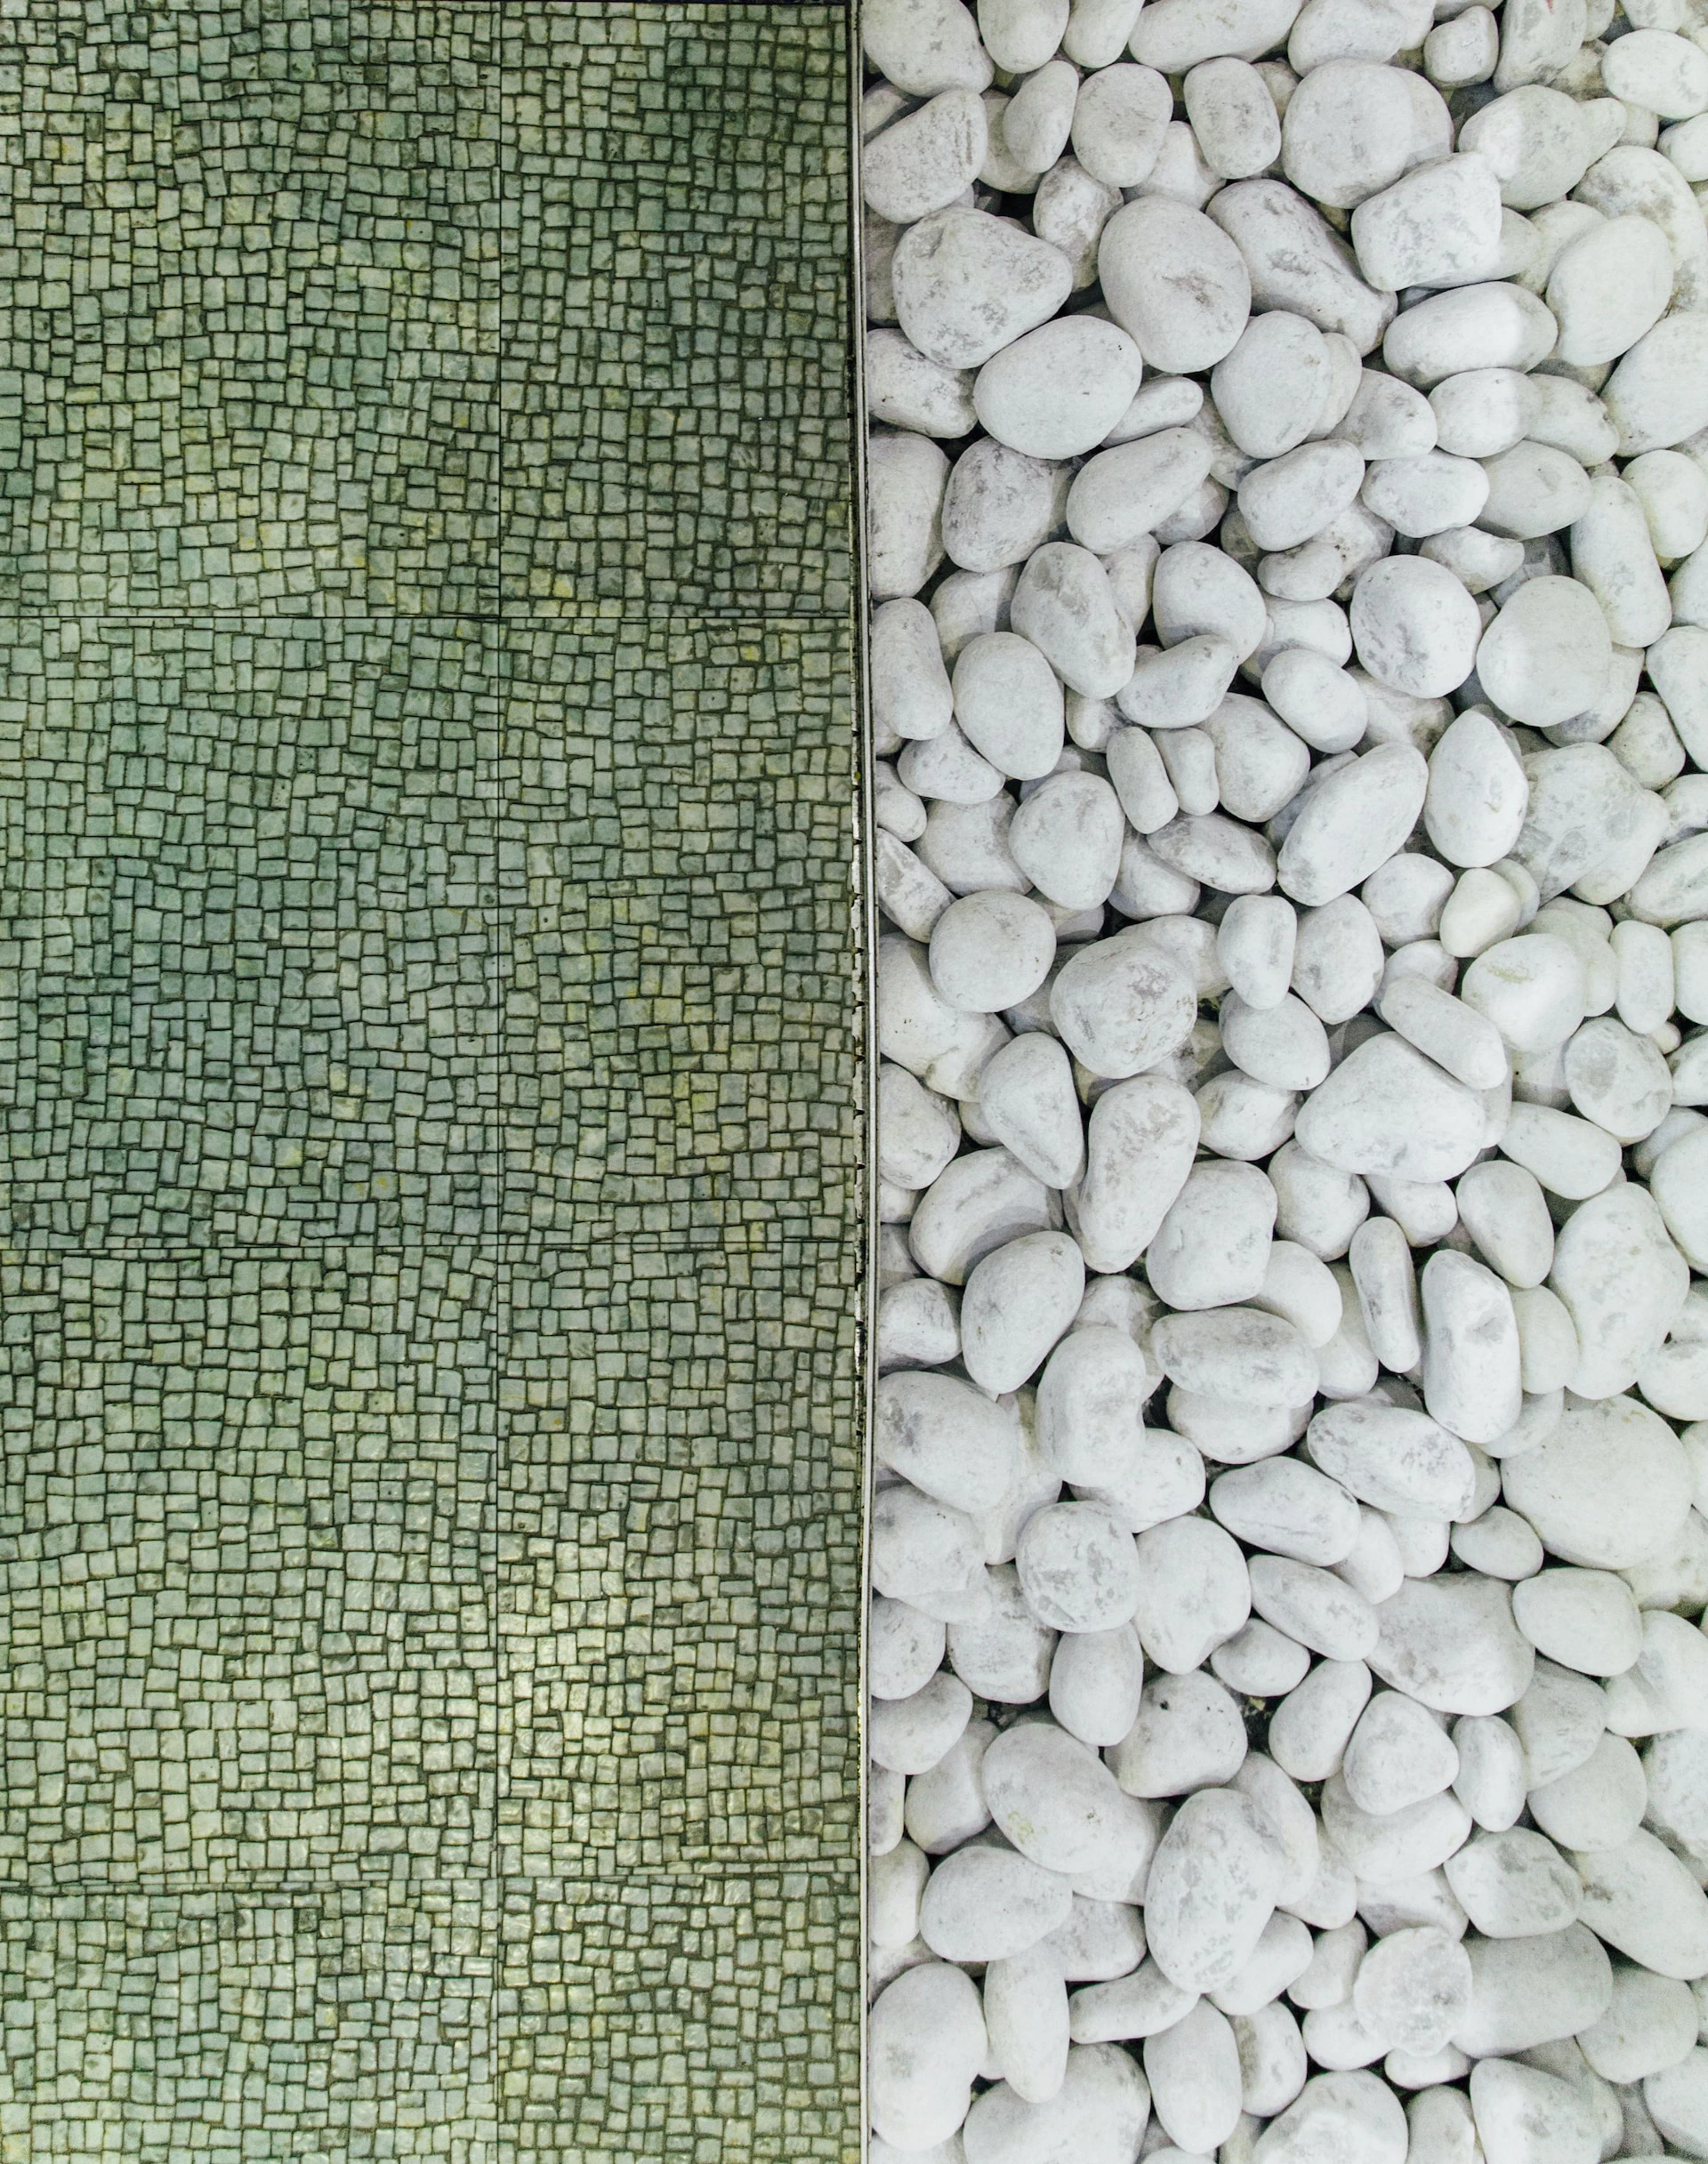 two contrasting materials in a straight vertical line - green stone on the left and white pebbles on the right